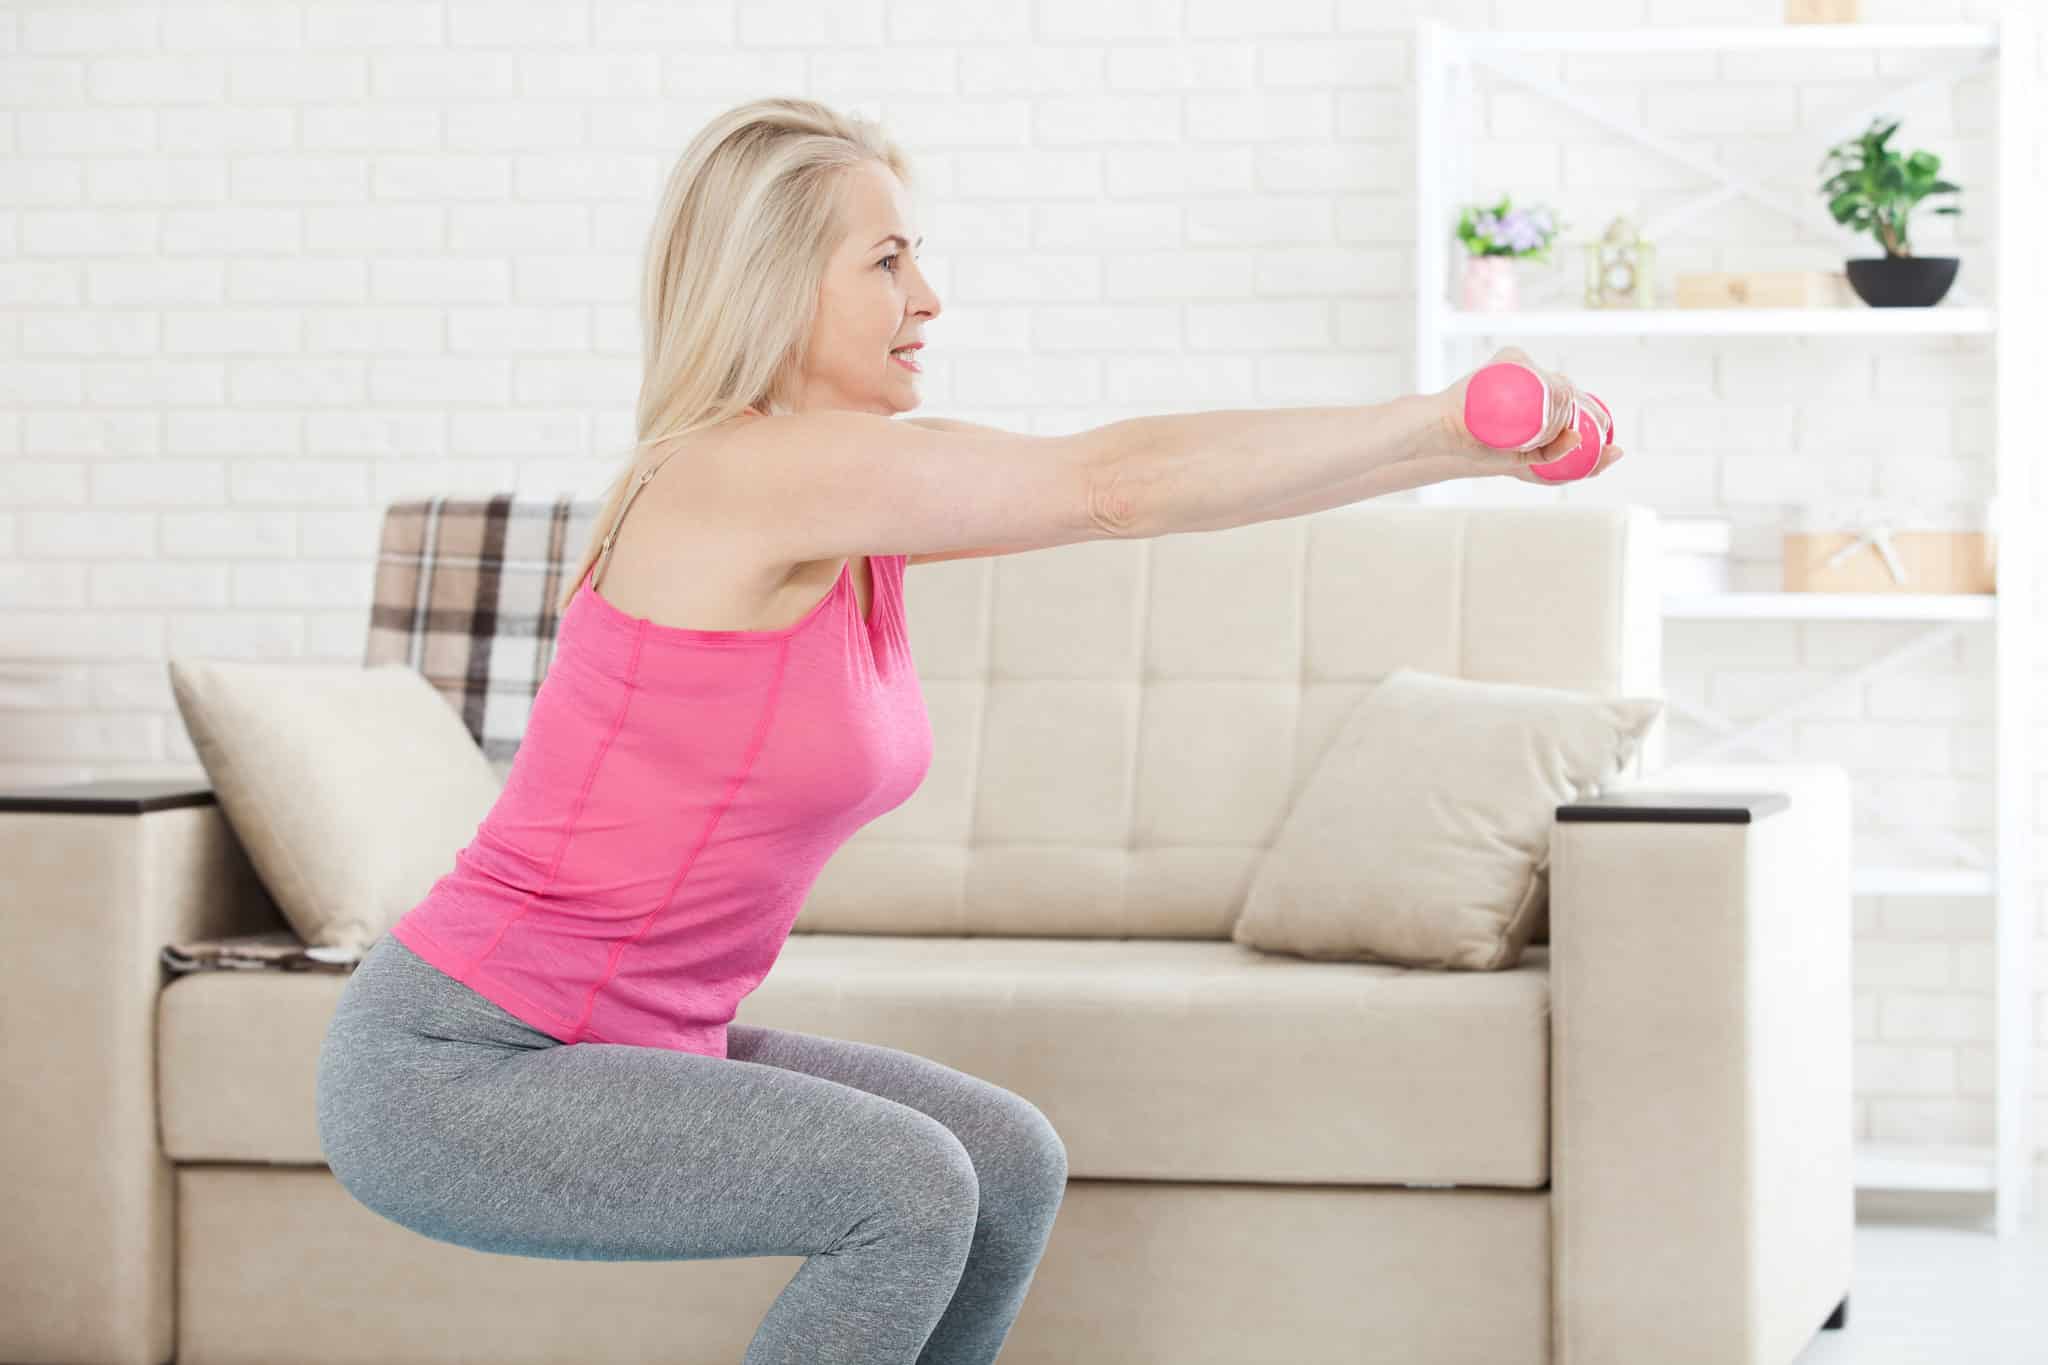 Woman implicit    50 holding dumbbells and squatting successful  surviving  country   for spot    grooming  session